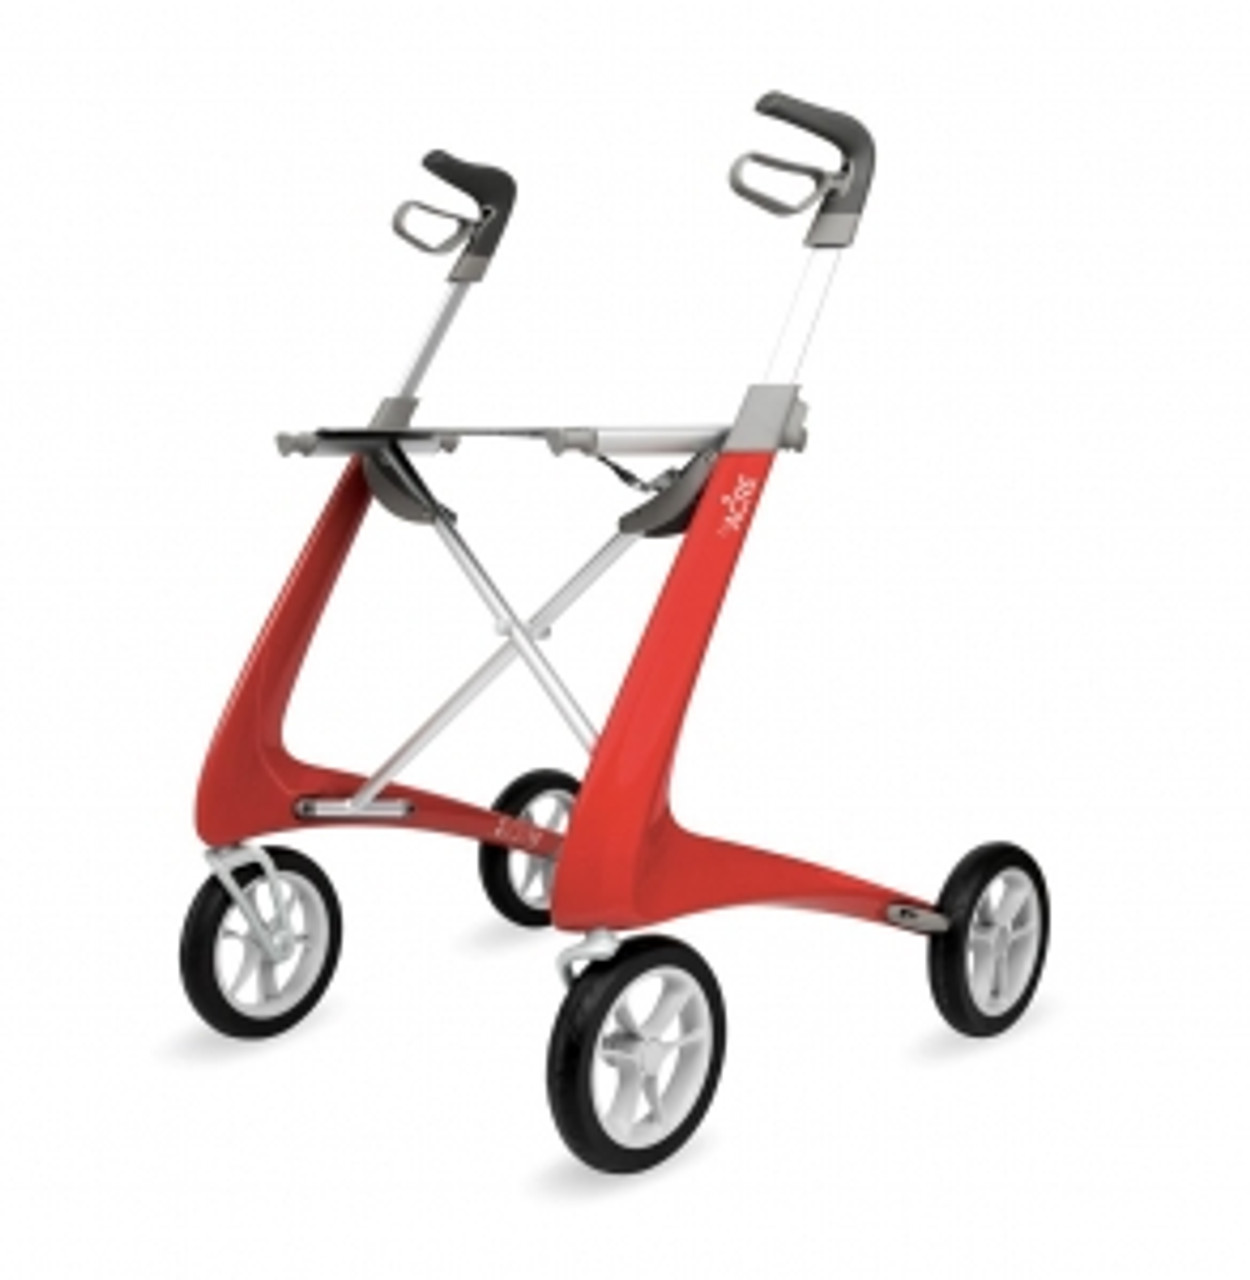 Carbon Fiber Rollator with 16.5" W x 24" H Regular Seat, Red